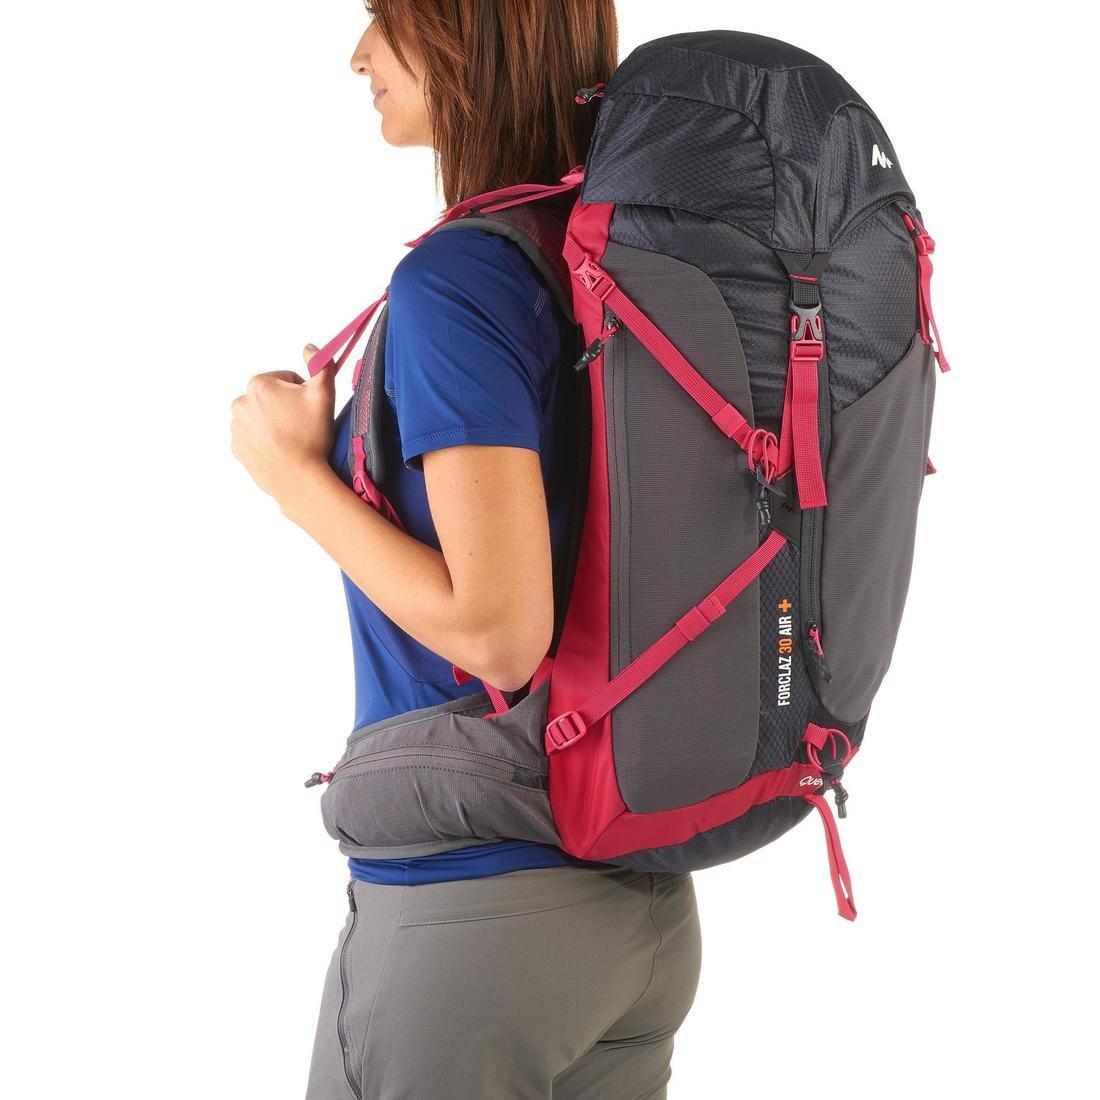 QUECHUA - Mh500 Womens  Mountain Hiking Backpack, Carbon Grey